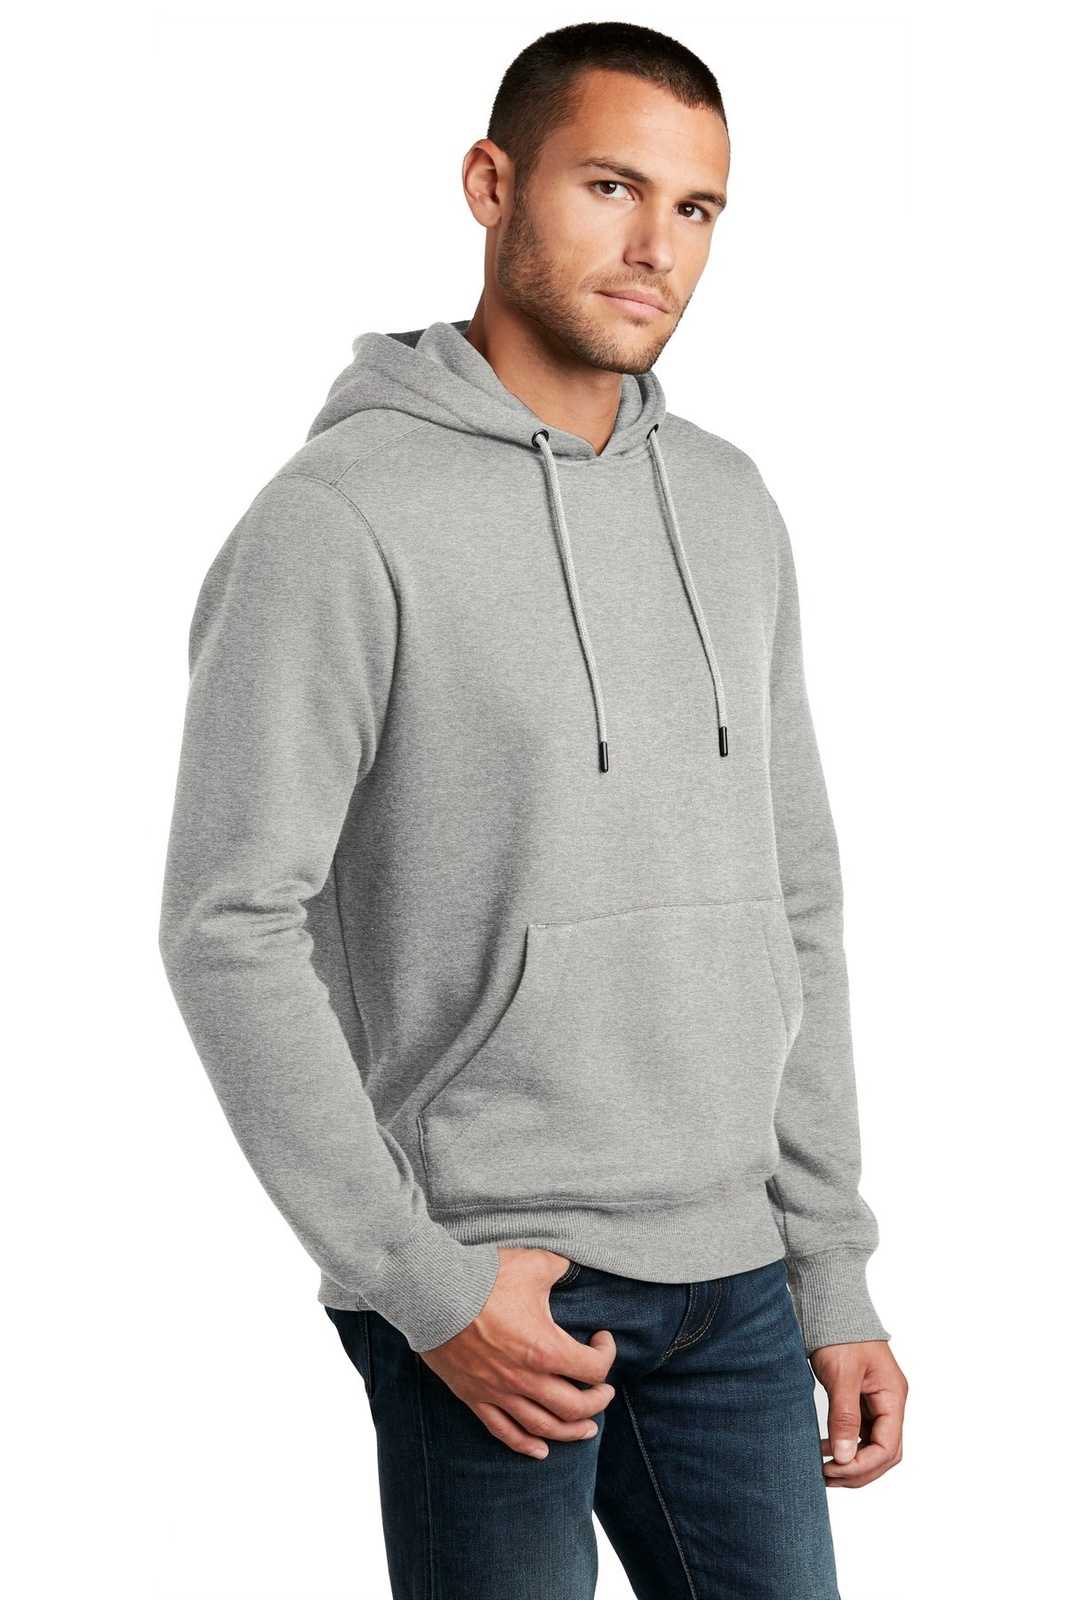 District DT1101 Perfect Weight Fleece Hoodie - Heathered Steel - HIT a Double - 4